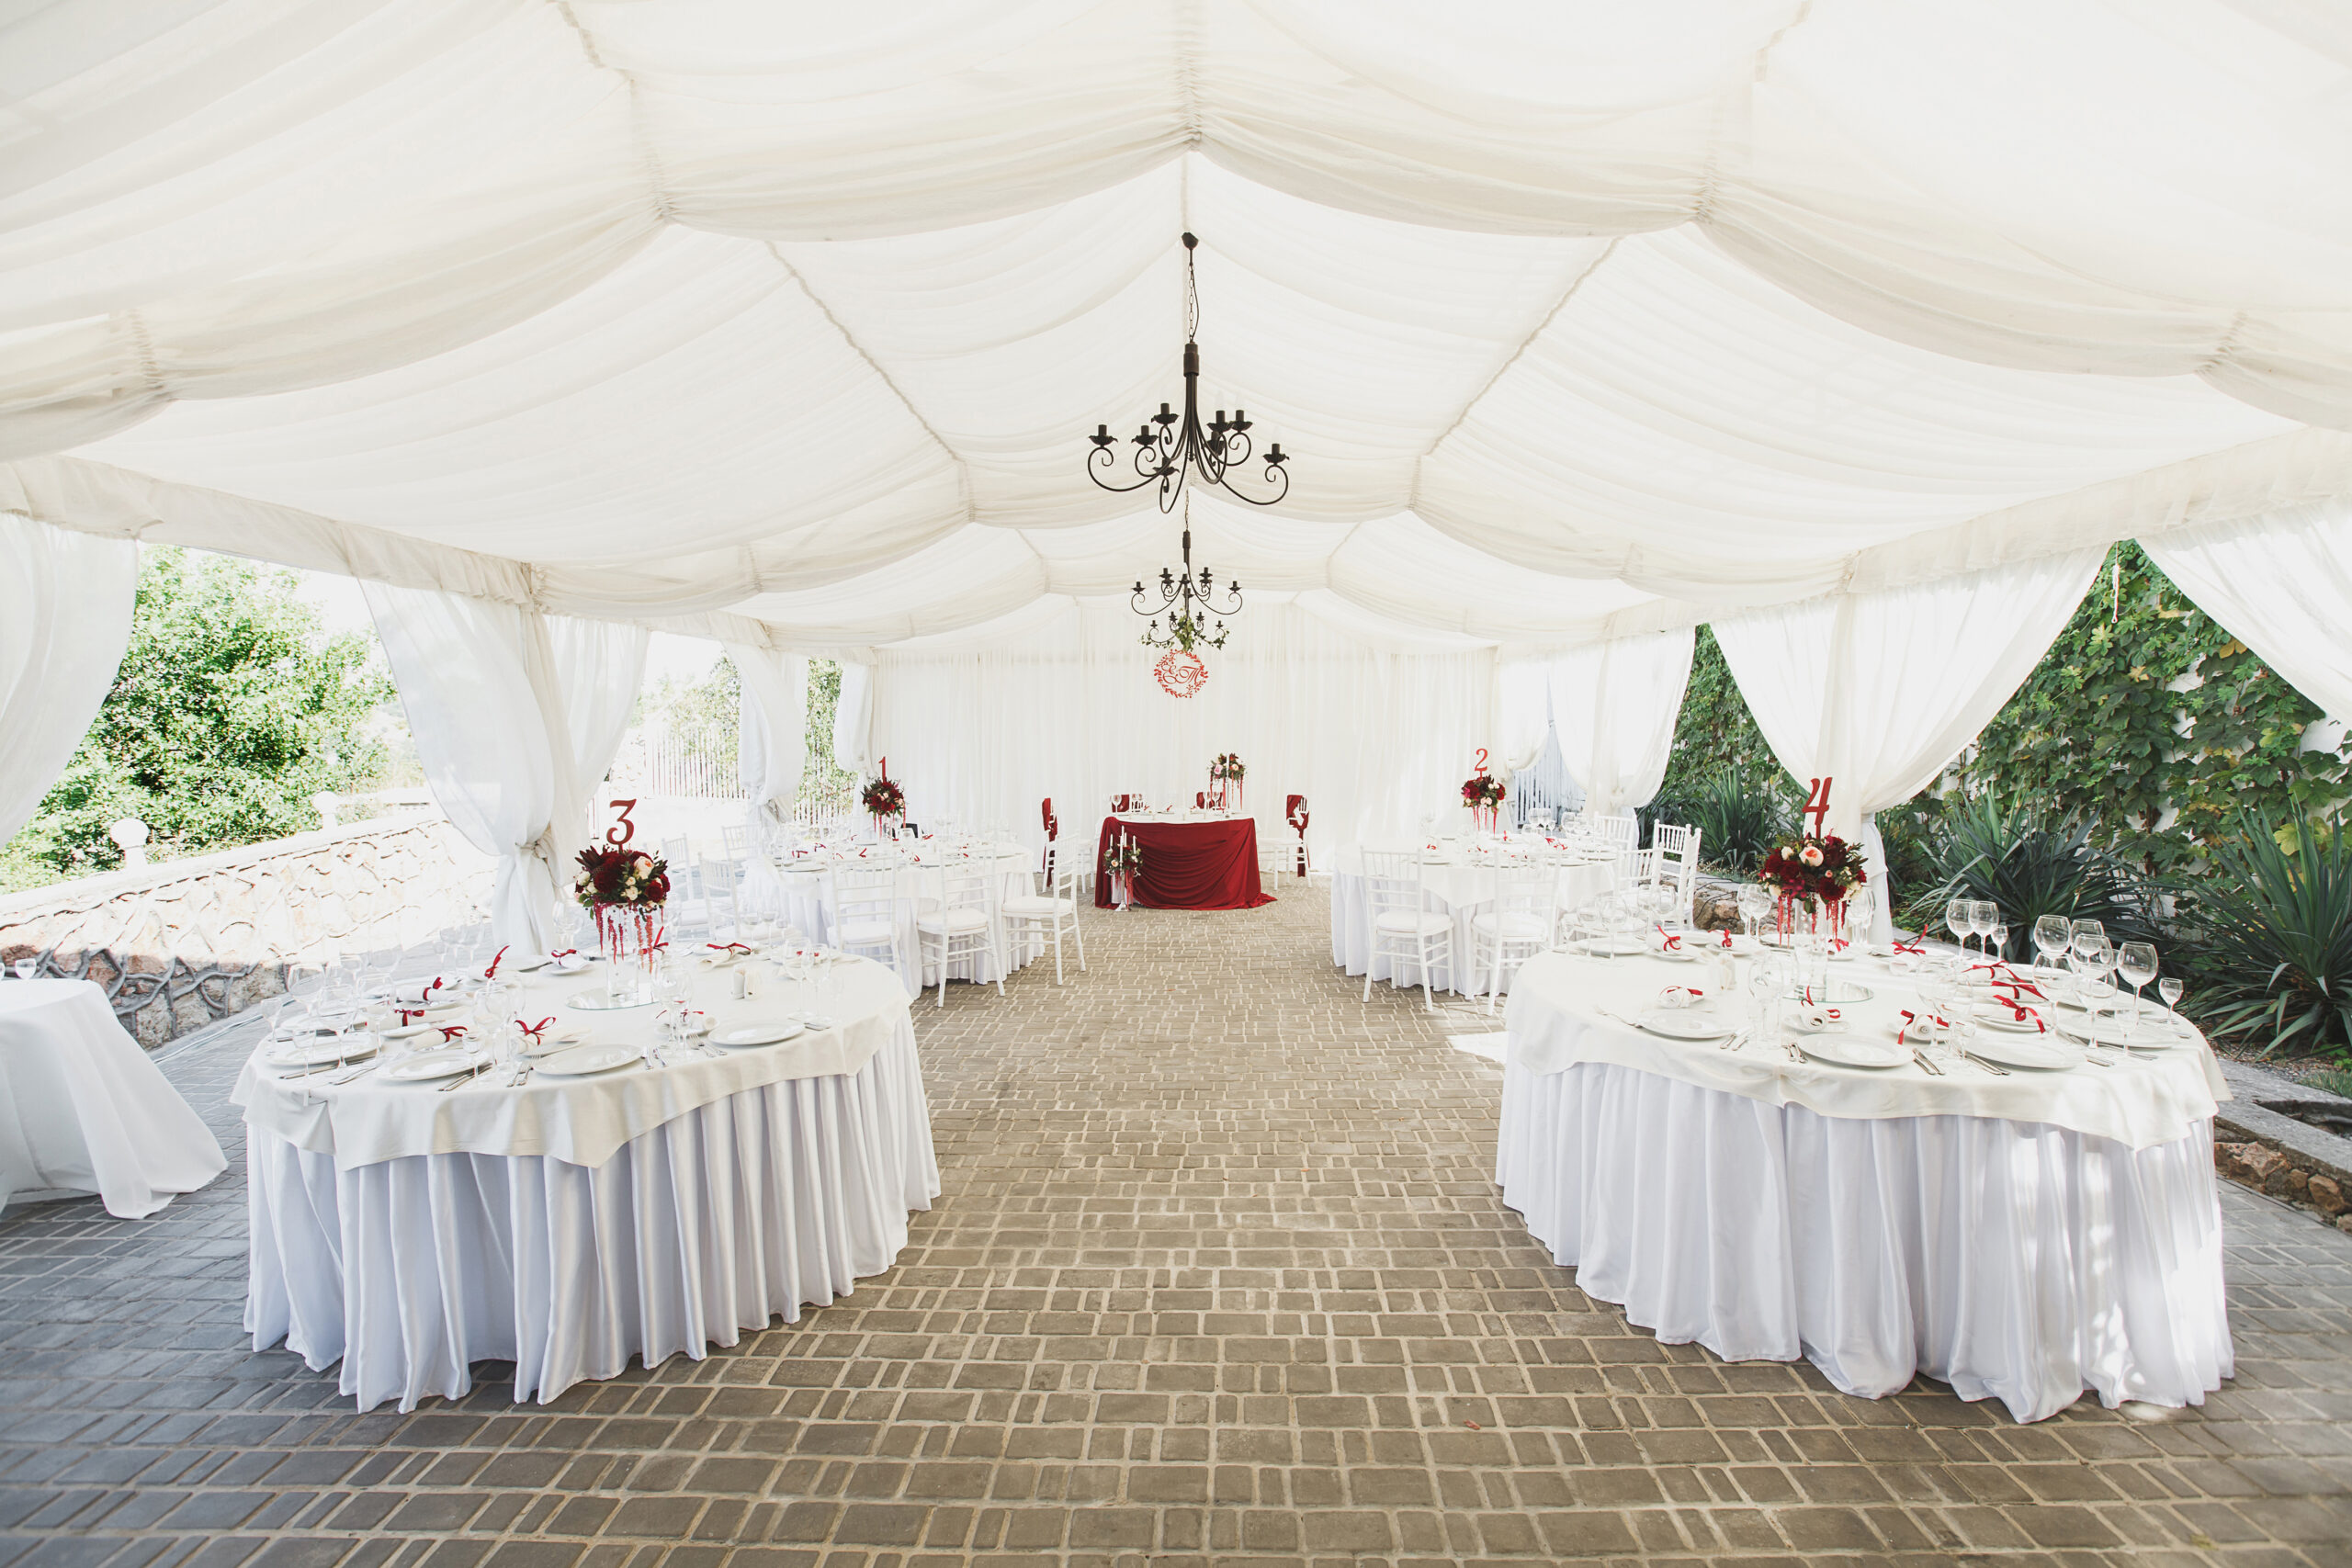 Beautiful Banquet hall under a tent for a wedding reception.